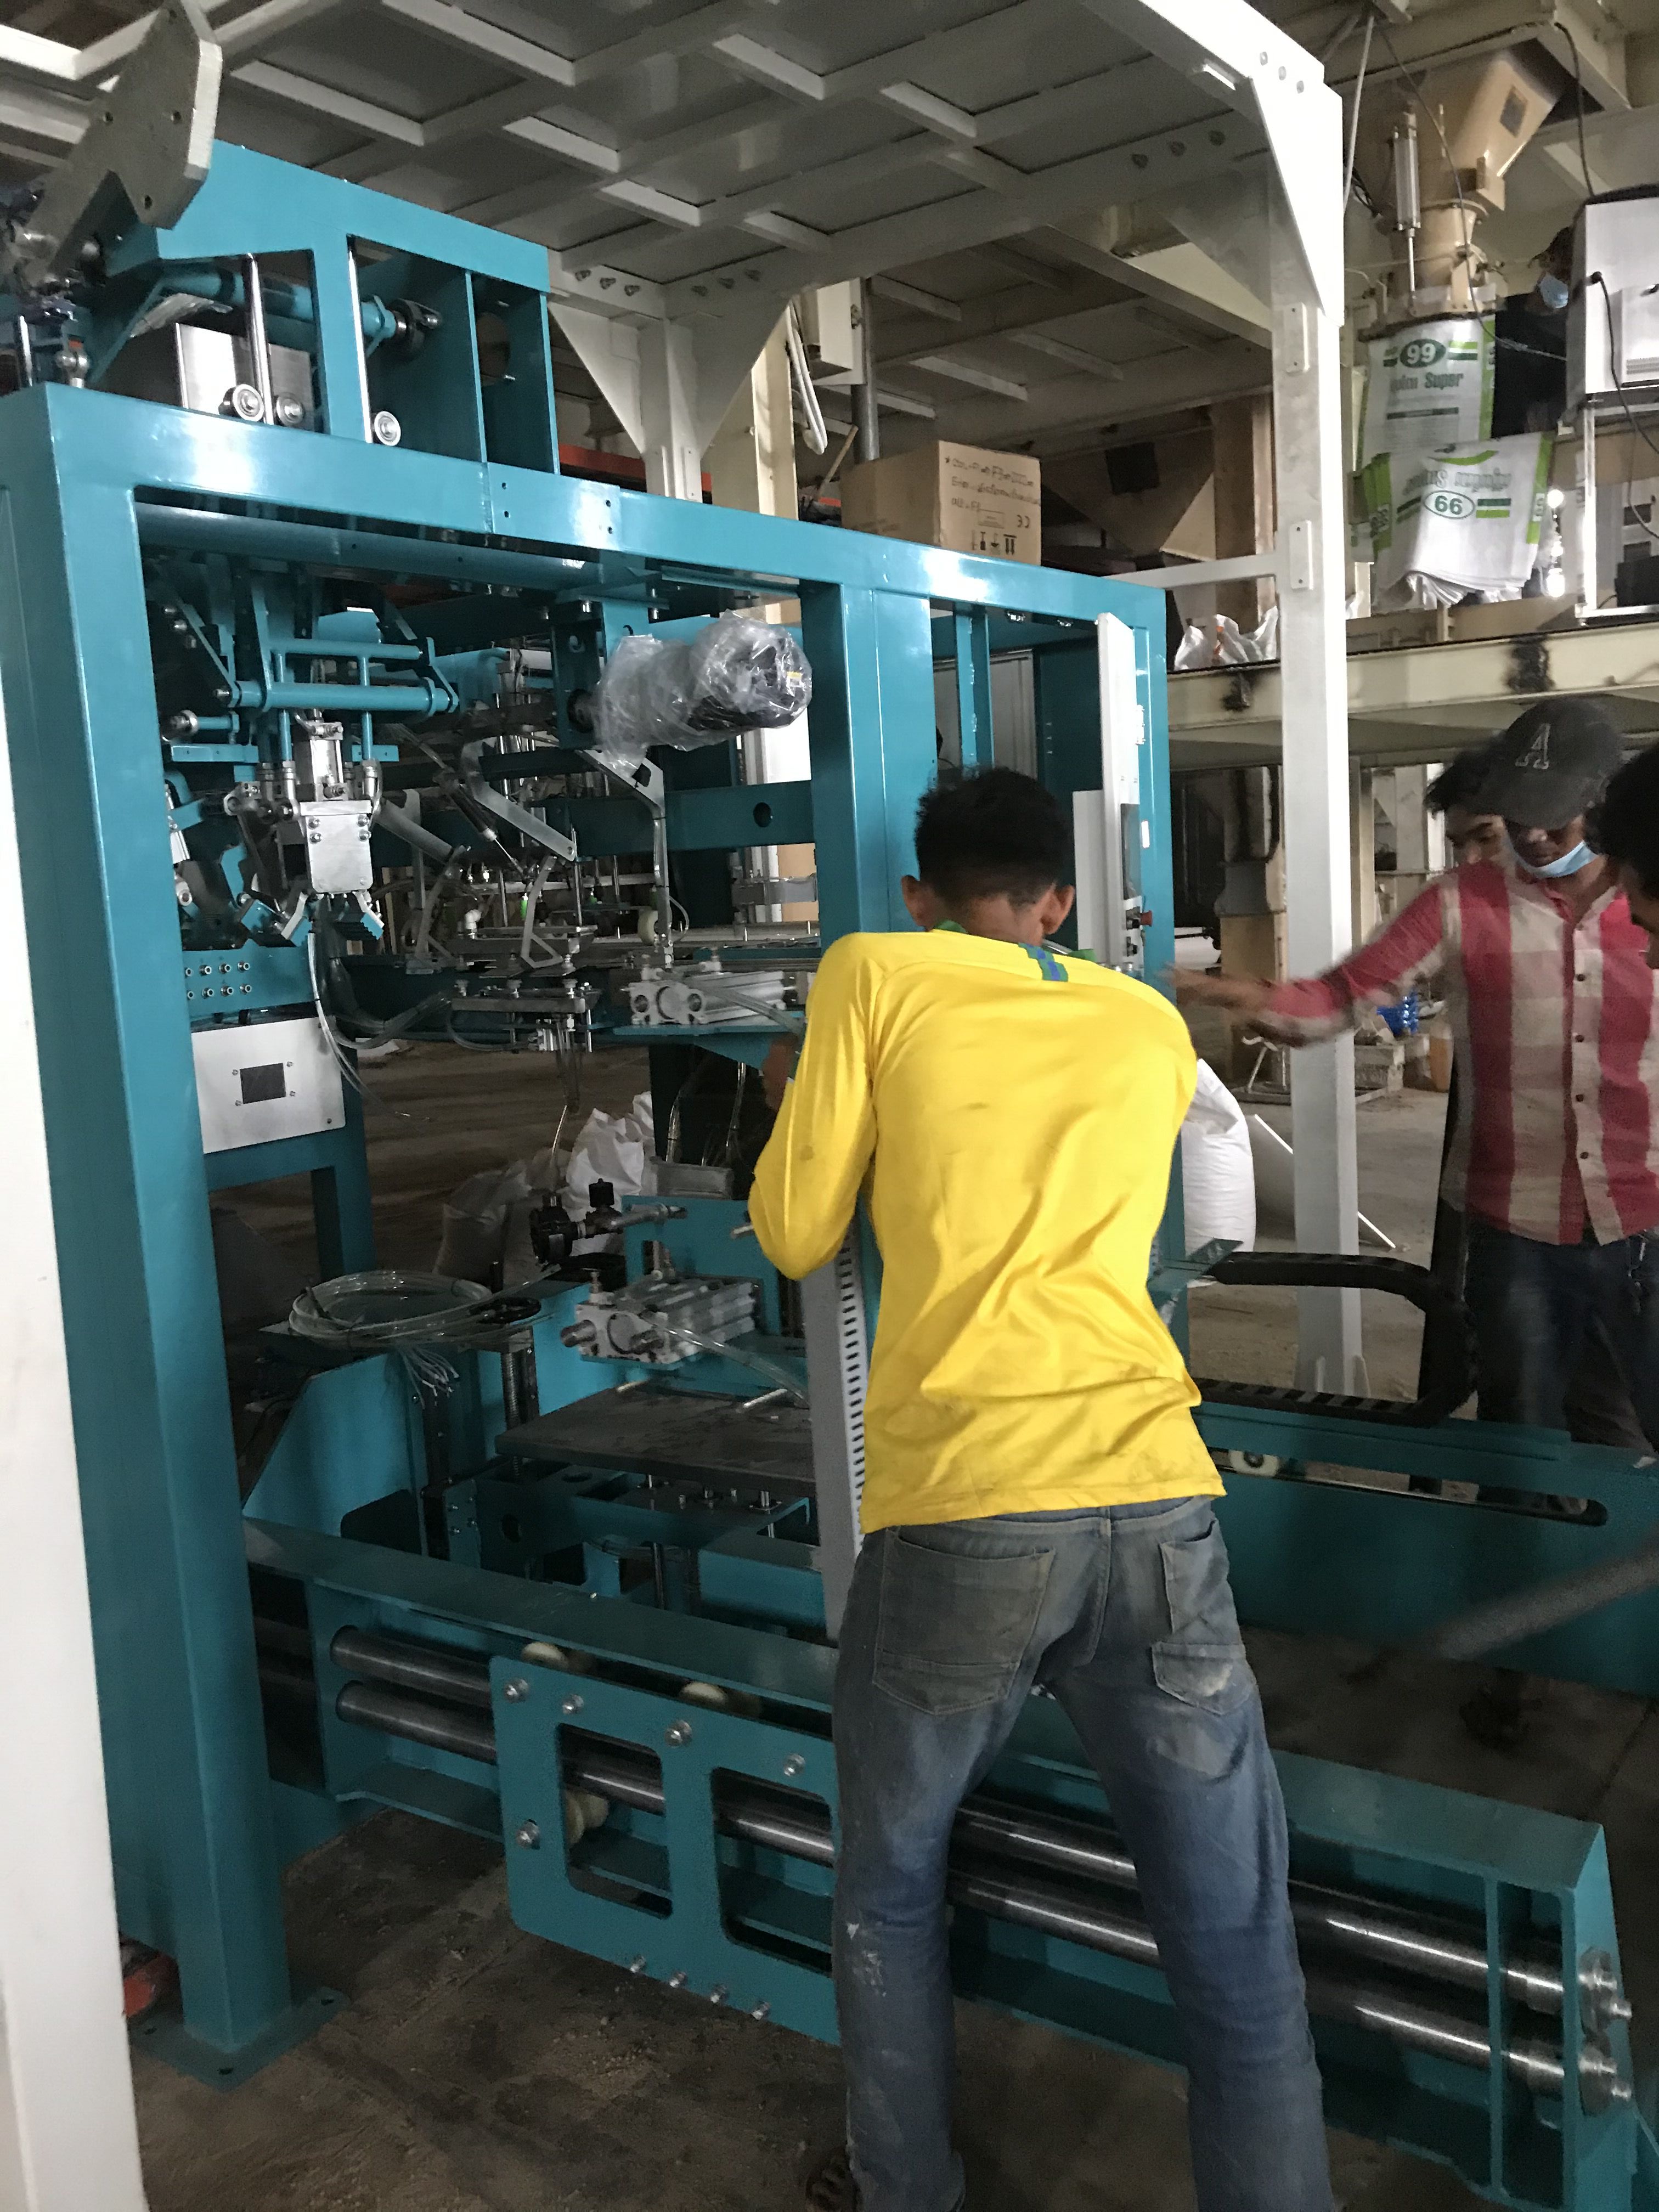 packing machine Granulated Single Super Phosphate bagging machine fully Automatic Packing Palletizing Line, Fully Automatic Packing Line, Fully Automatic Bagging Line, Fully Automatic filling and pack